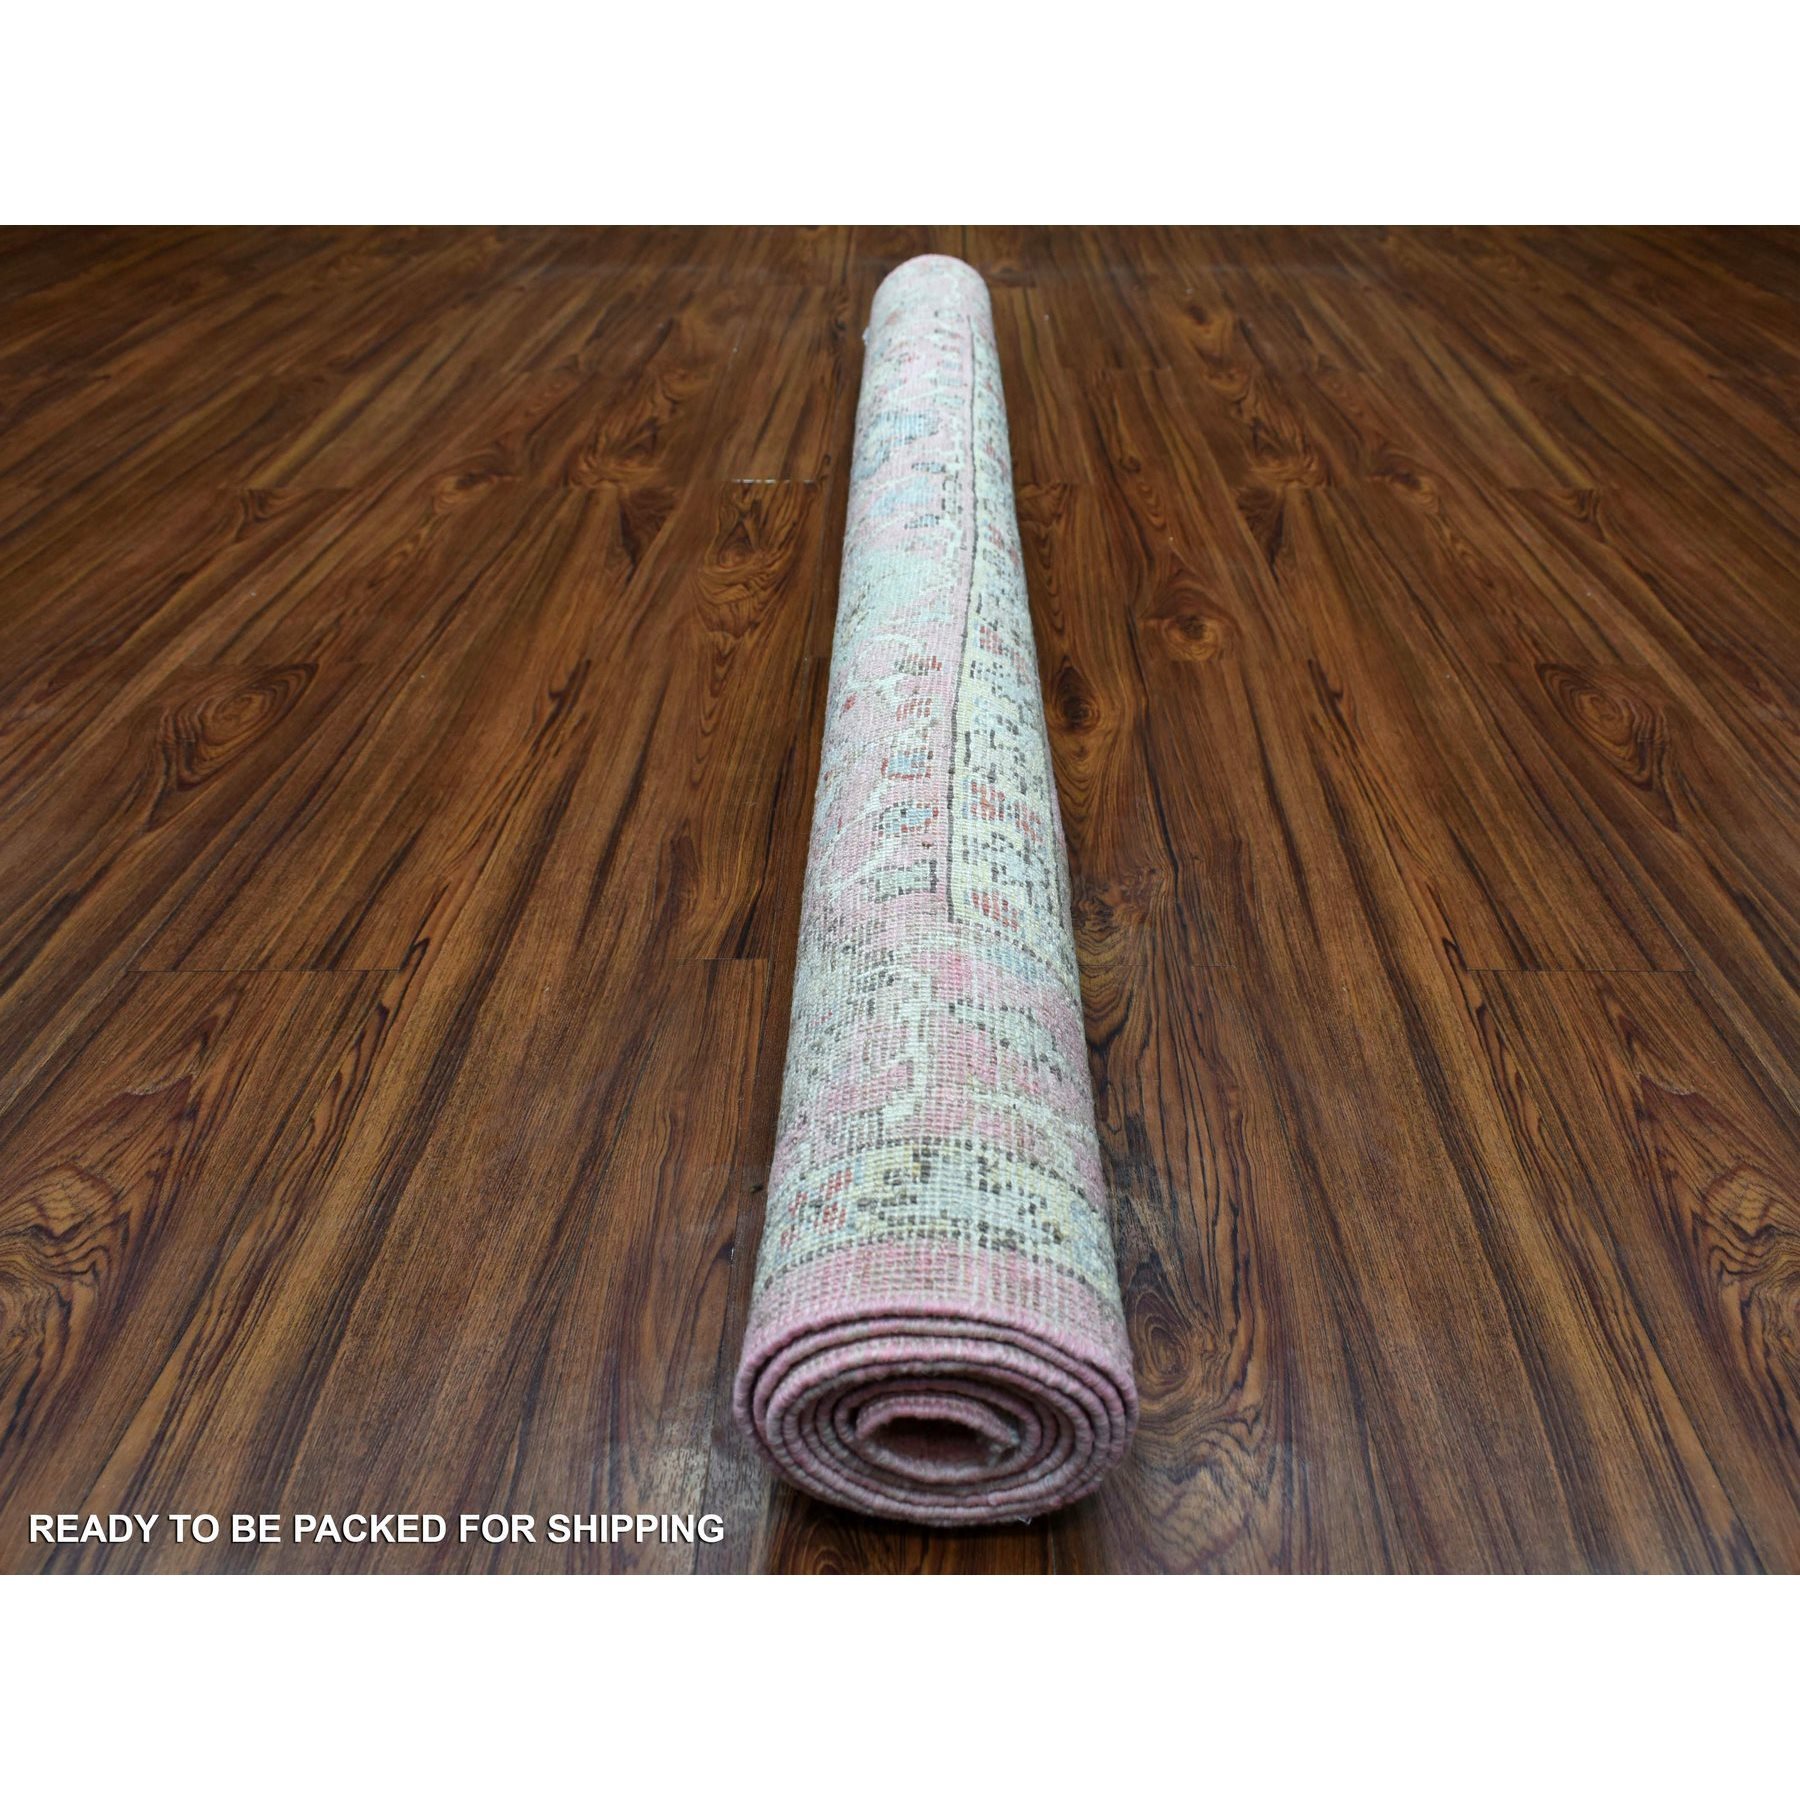 5'9"x8'5" Hand Woven Coral Pink Angora Ushak with Bold Floral Pattern Soft and Pliable Wool Oriental Rug 